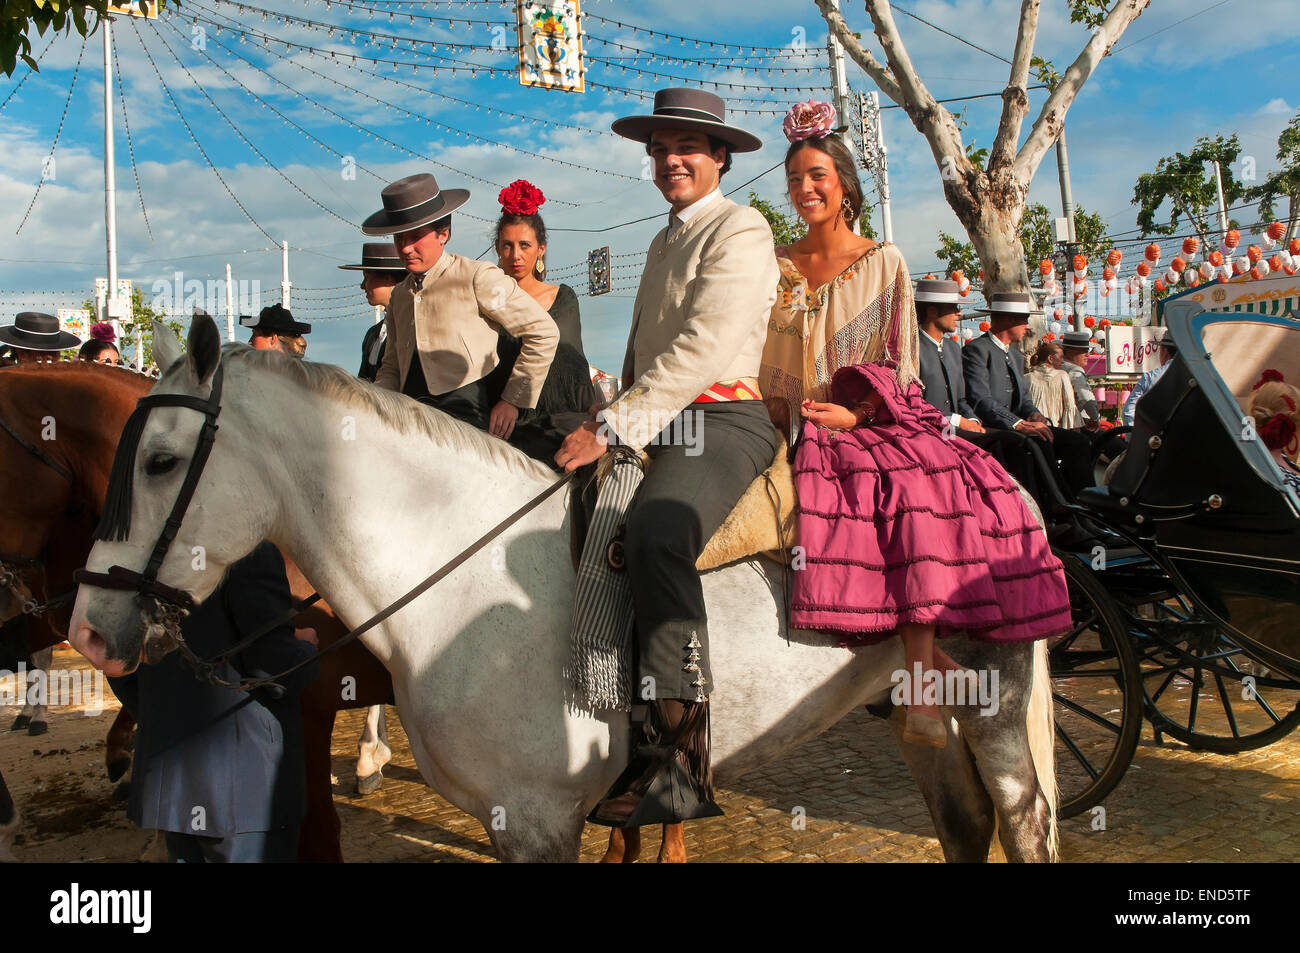 April Fair, People riding horses, Seville, Region of Andalusia, Spain, Europe Stock Photo